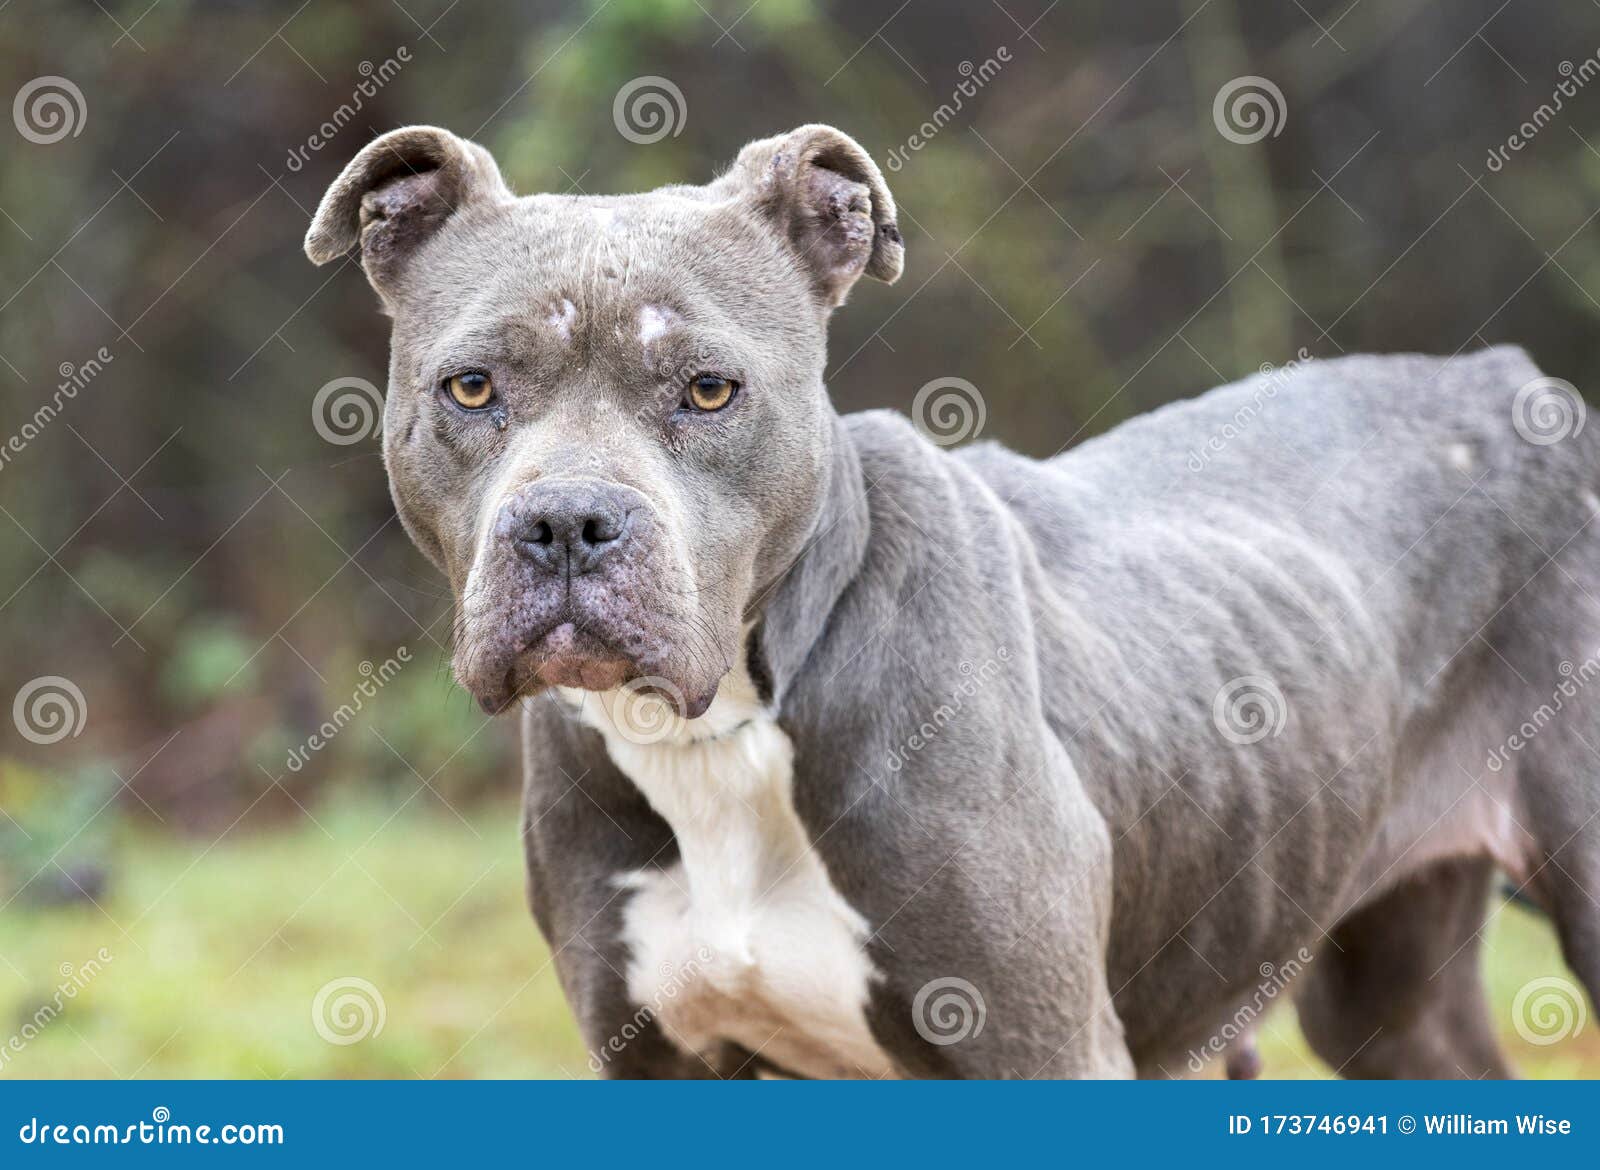 can a pitbull be an outside dog